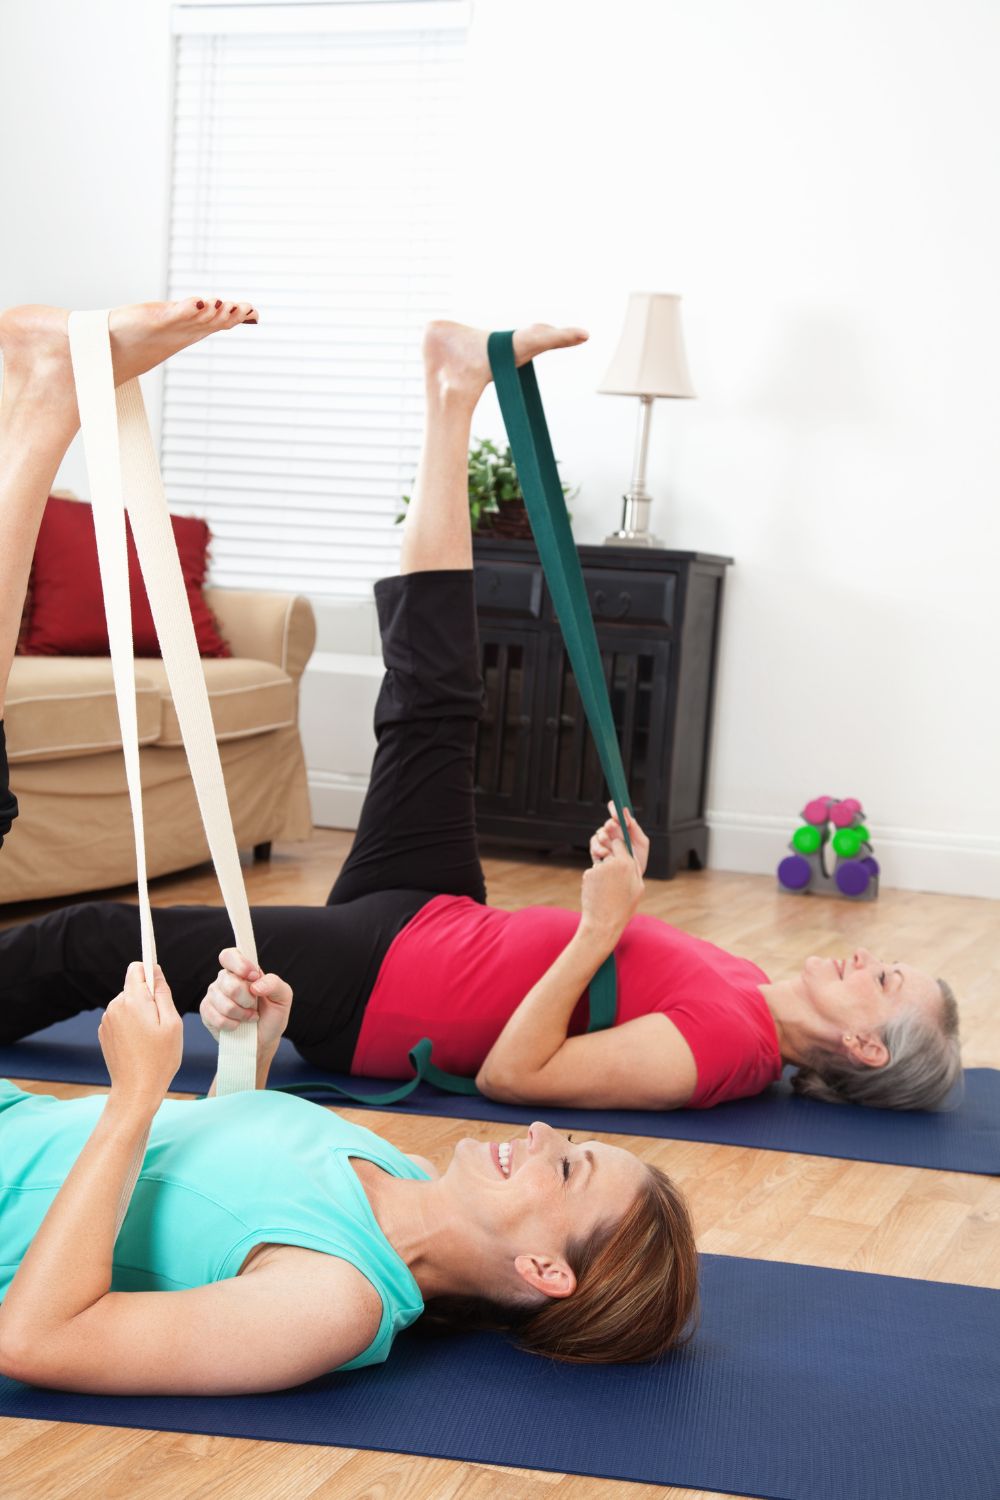 Yoga: Learn how to use the yoga strap